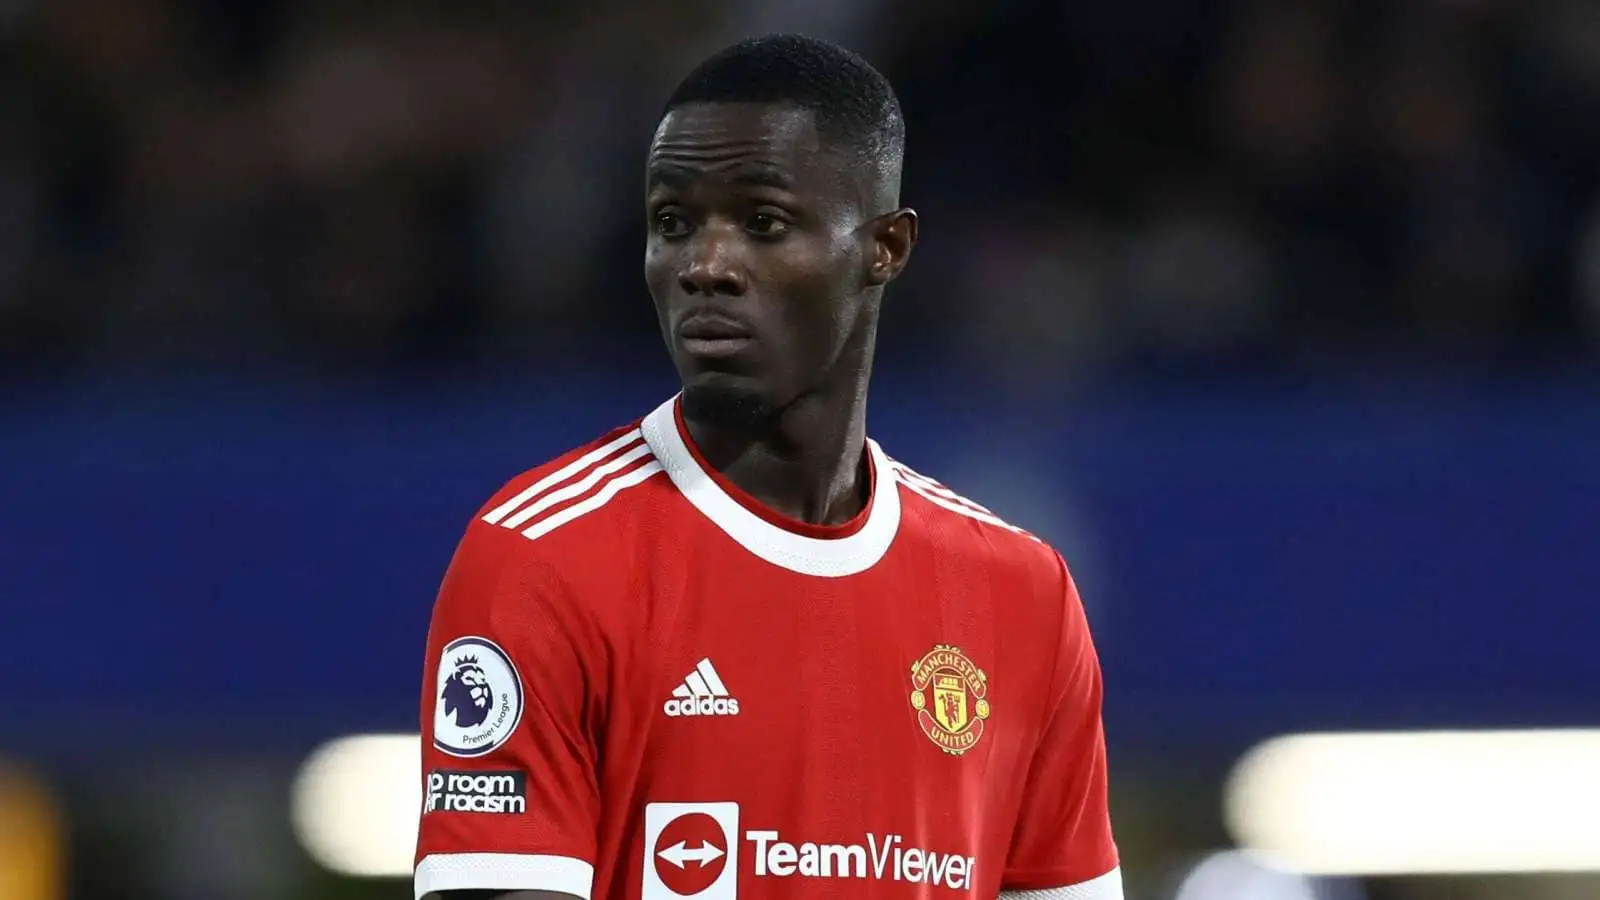 Man Utd transfer news: Eric Bailly deal becomes more ‘feasible’ for Serie A side he would ‘immediately’ choose